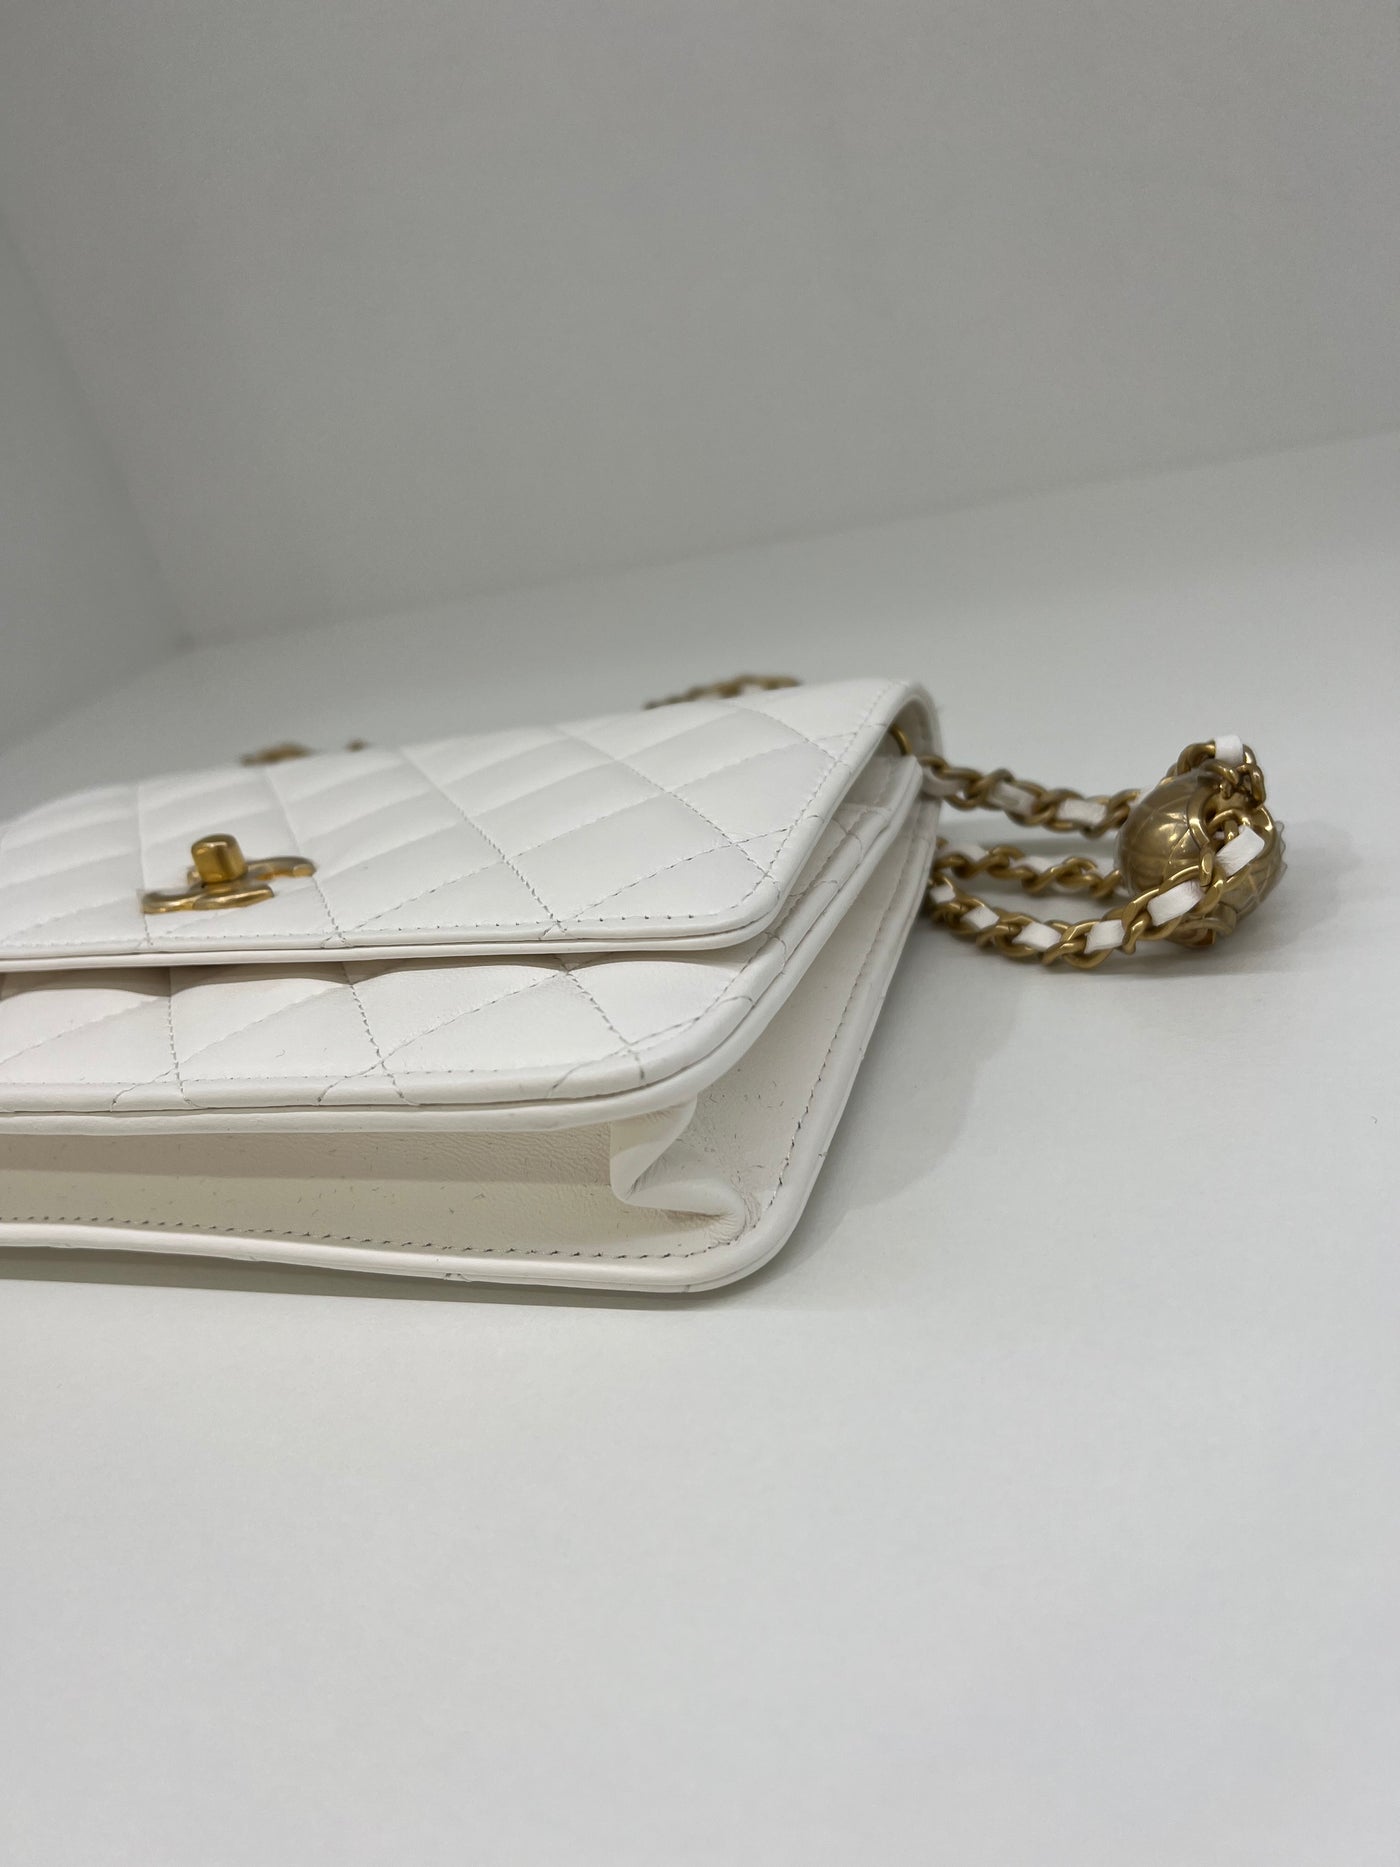 Chanel WOC (Wallet on Chain) Pearl Crush - White GHW - SOLD